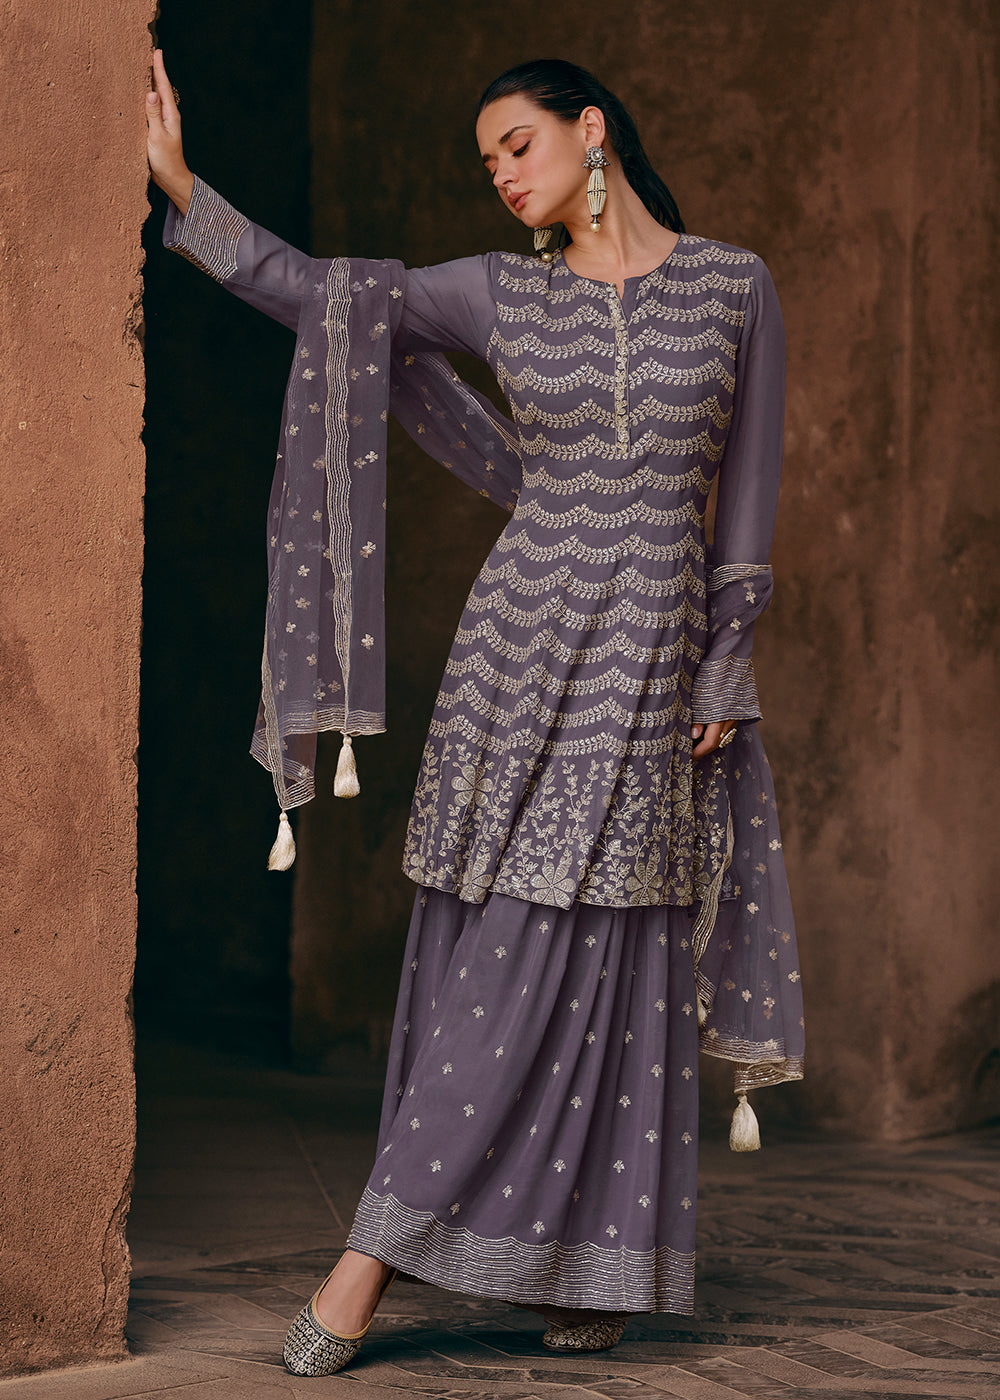 Shop Now Mauve Georgette Designer Style Embroidered Sharara Suit Online at Empress Clothing in USA, UK, Canada, Italy & Worldwide.